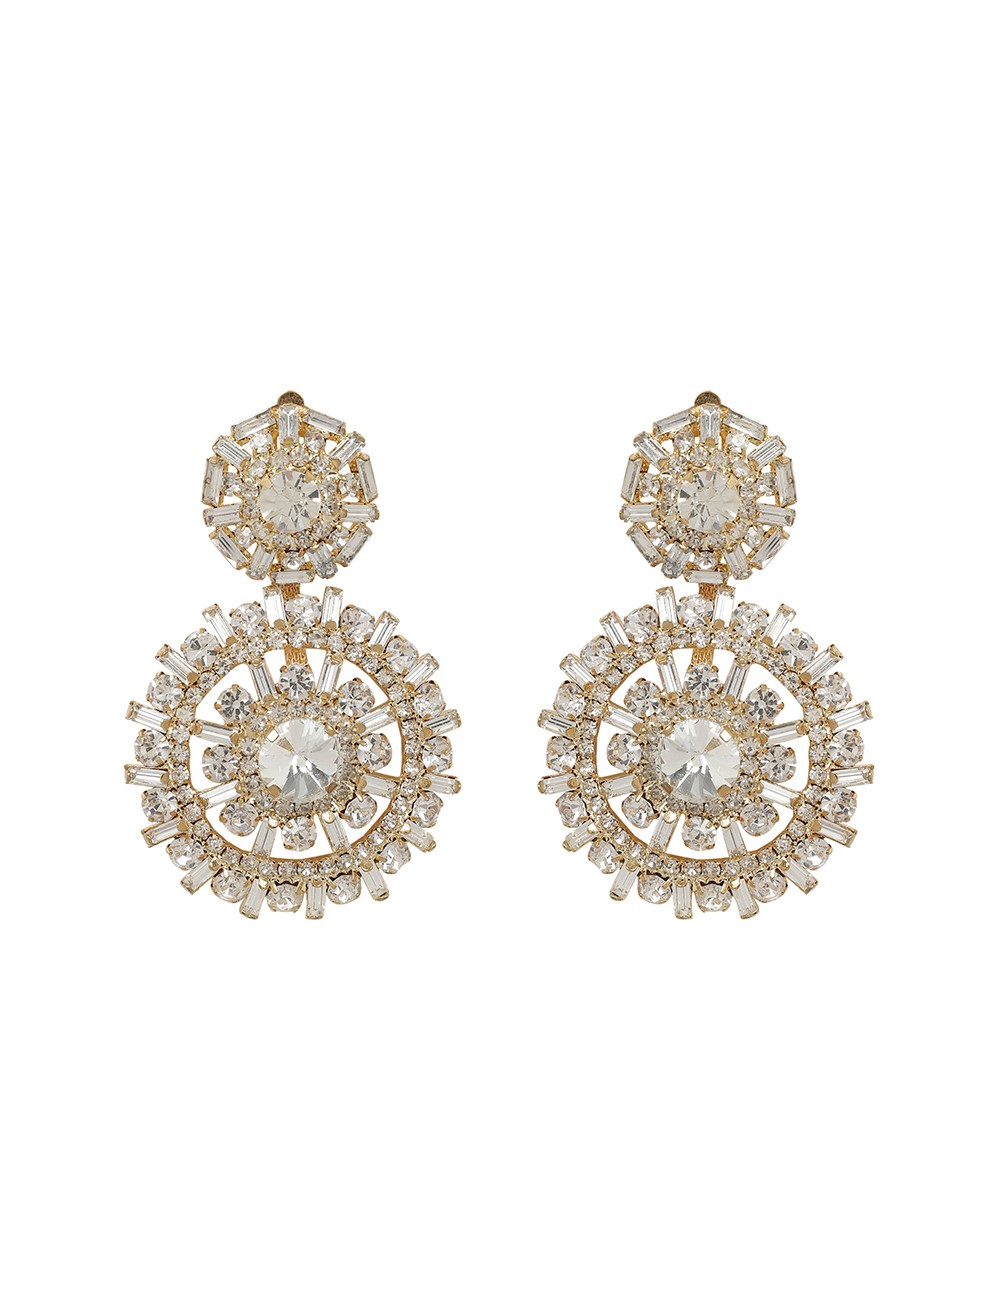 Gold Drop Earrings With Crystals